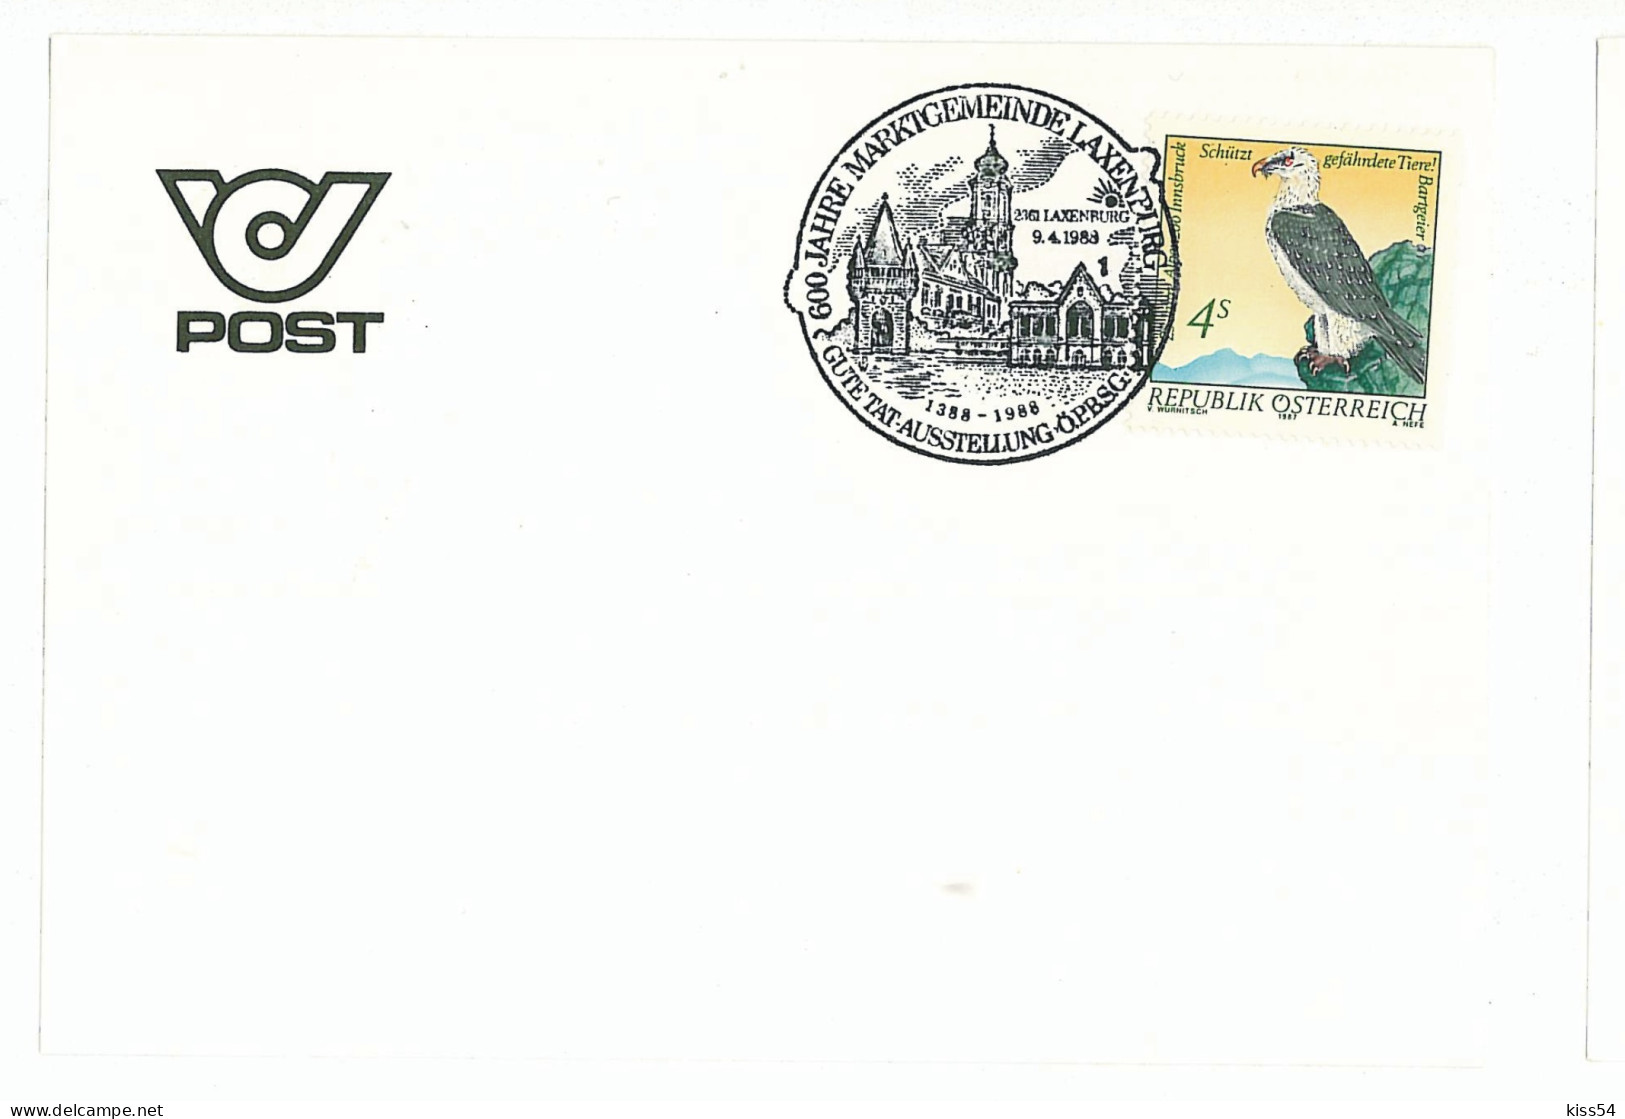 SC 73 - 752 AUSTRIA, Scout - Cover - Used - 1989 - Covers & Documents